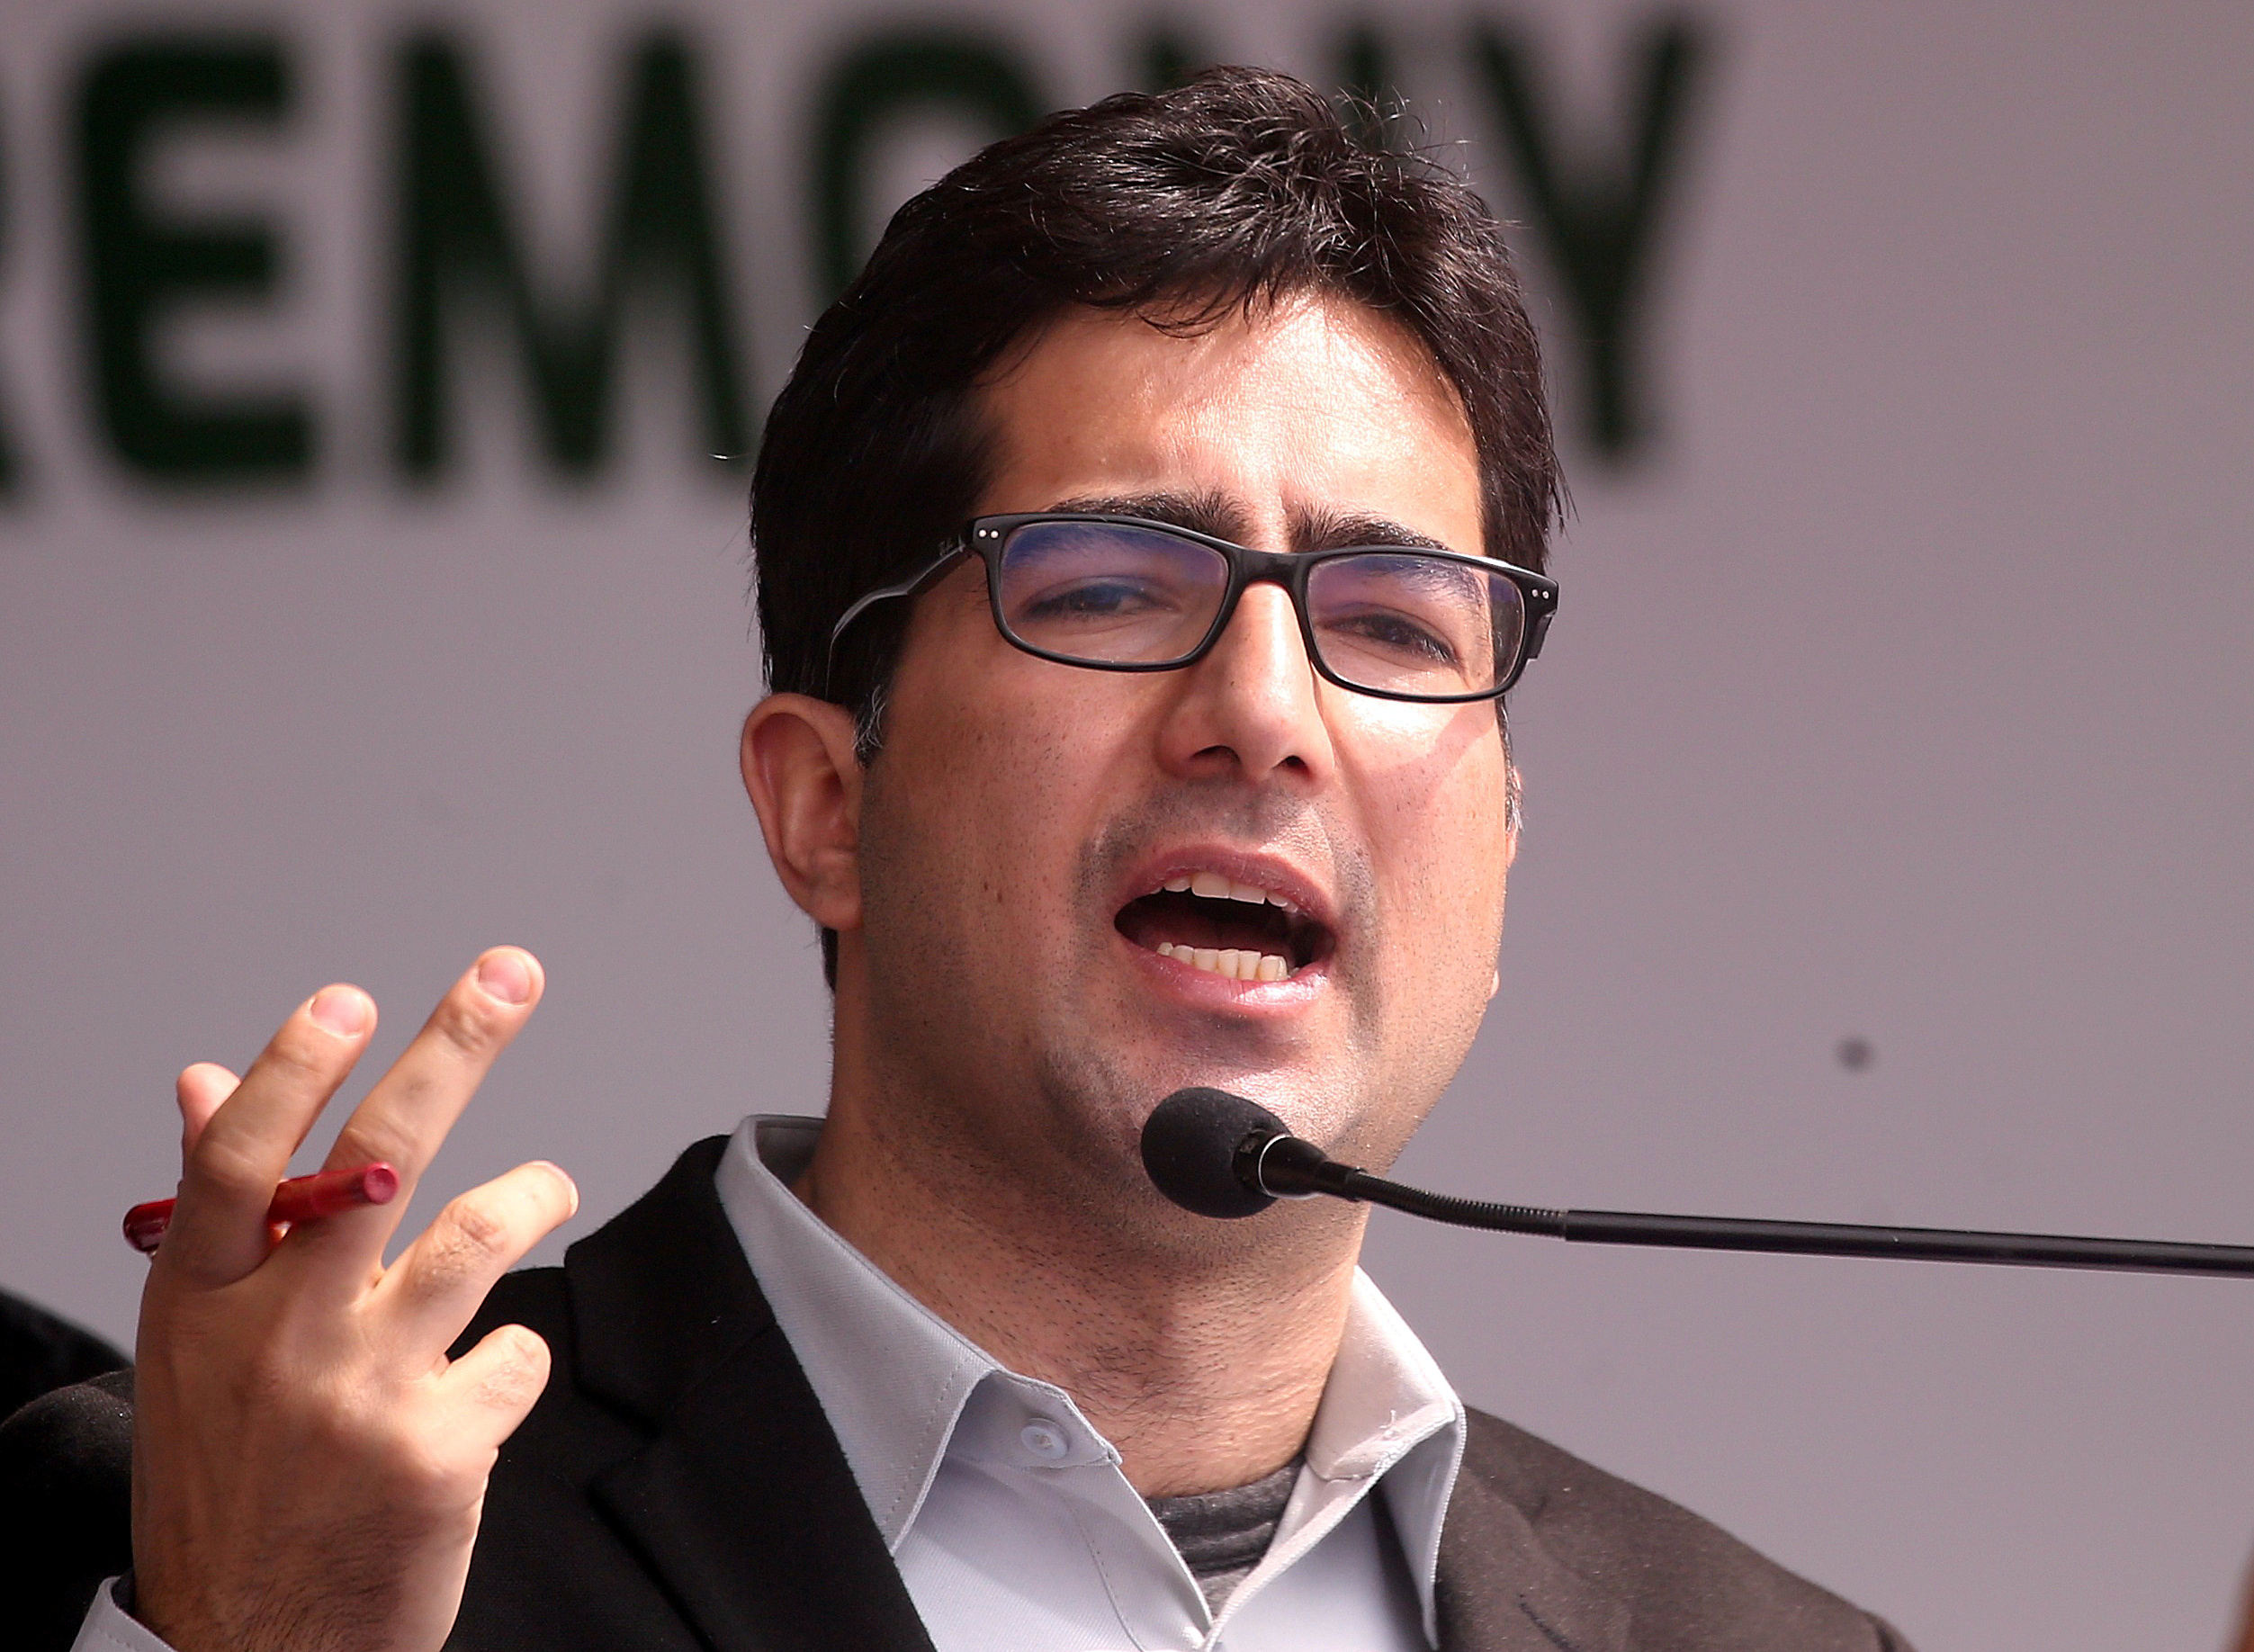 Govt reinstates IAS officer Shah Faesal in service 3 years after he resigned and joined politics in J-K